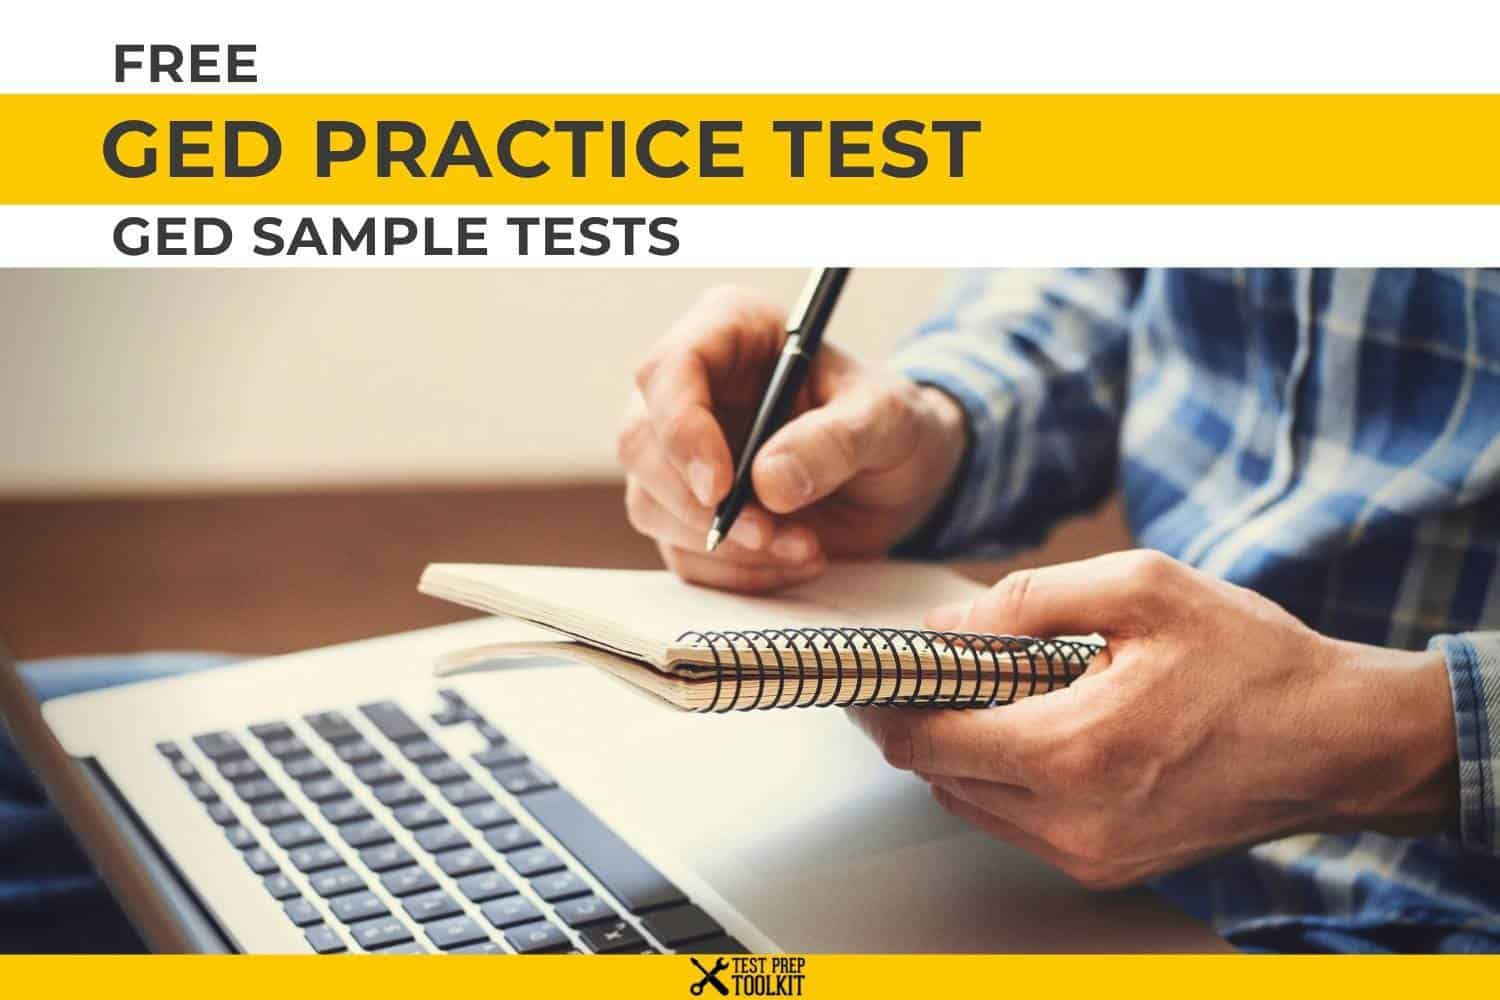 How To Take A Practice Ged Test Online